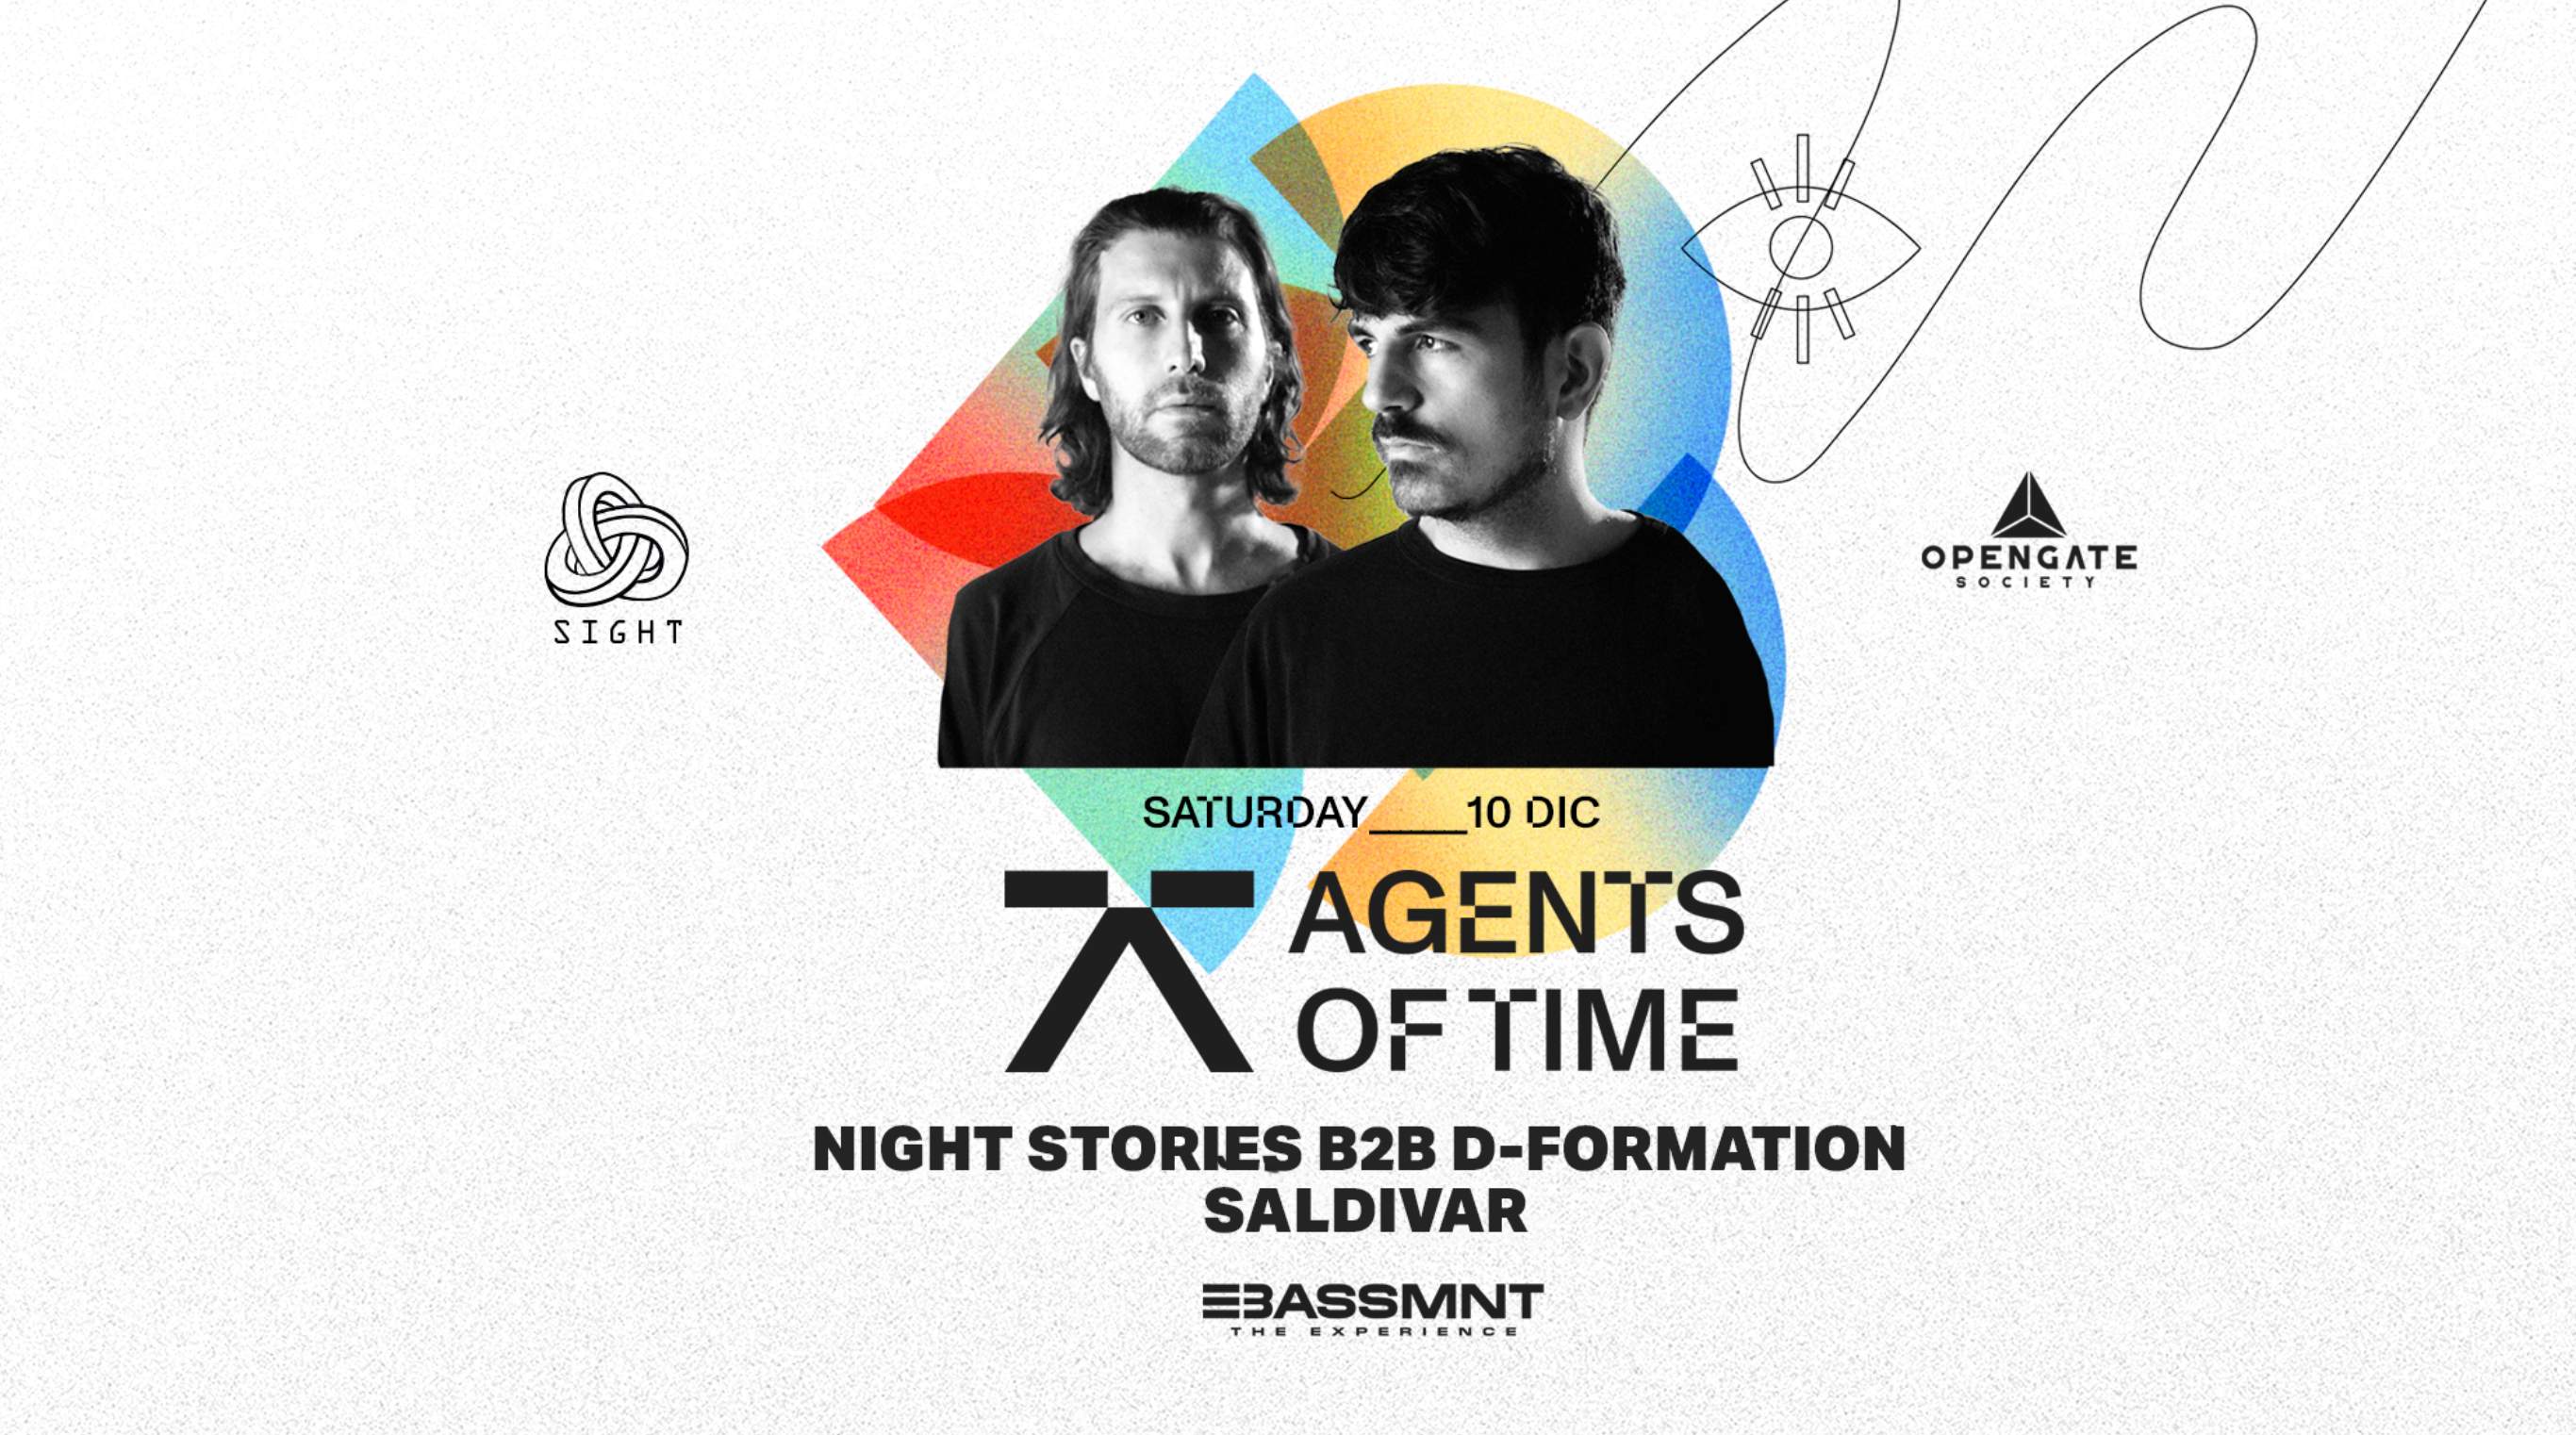 SIGHT pres. Agents Of Time, Night Stories, D-Formation, Saldivar - フライヤー表